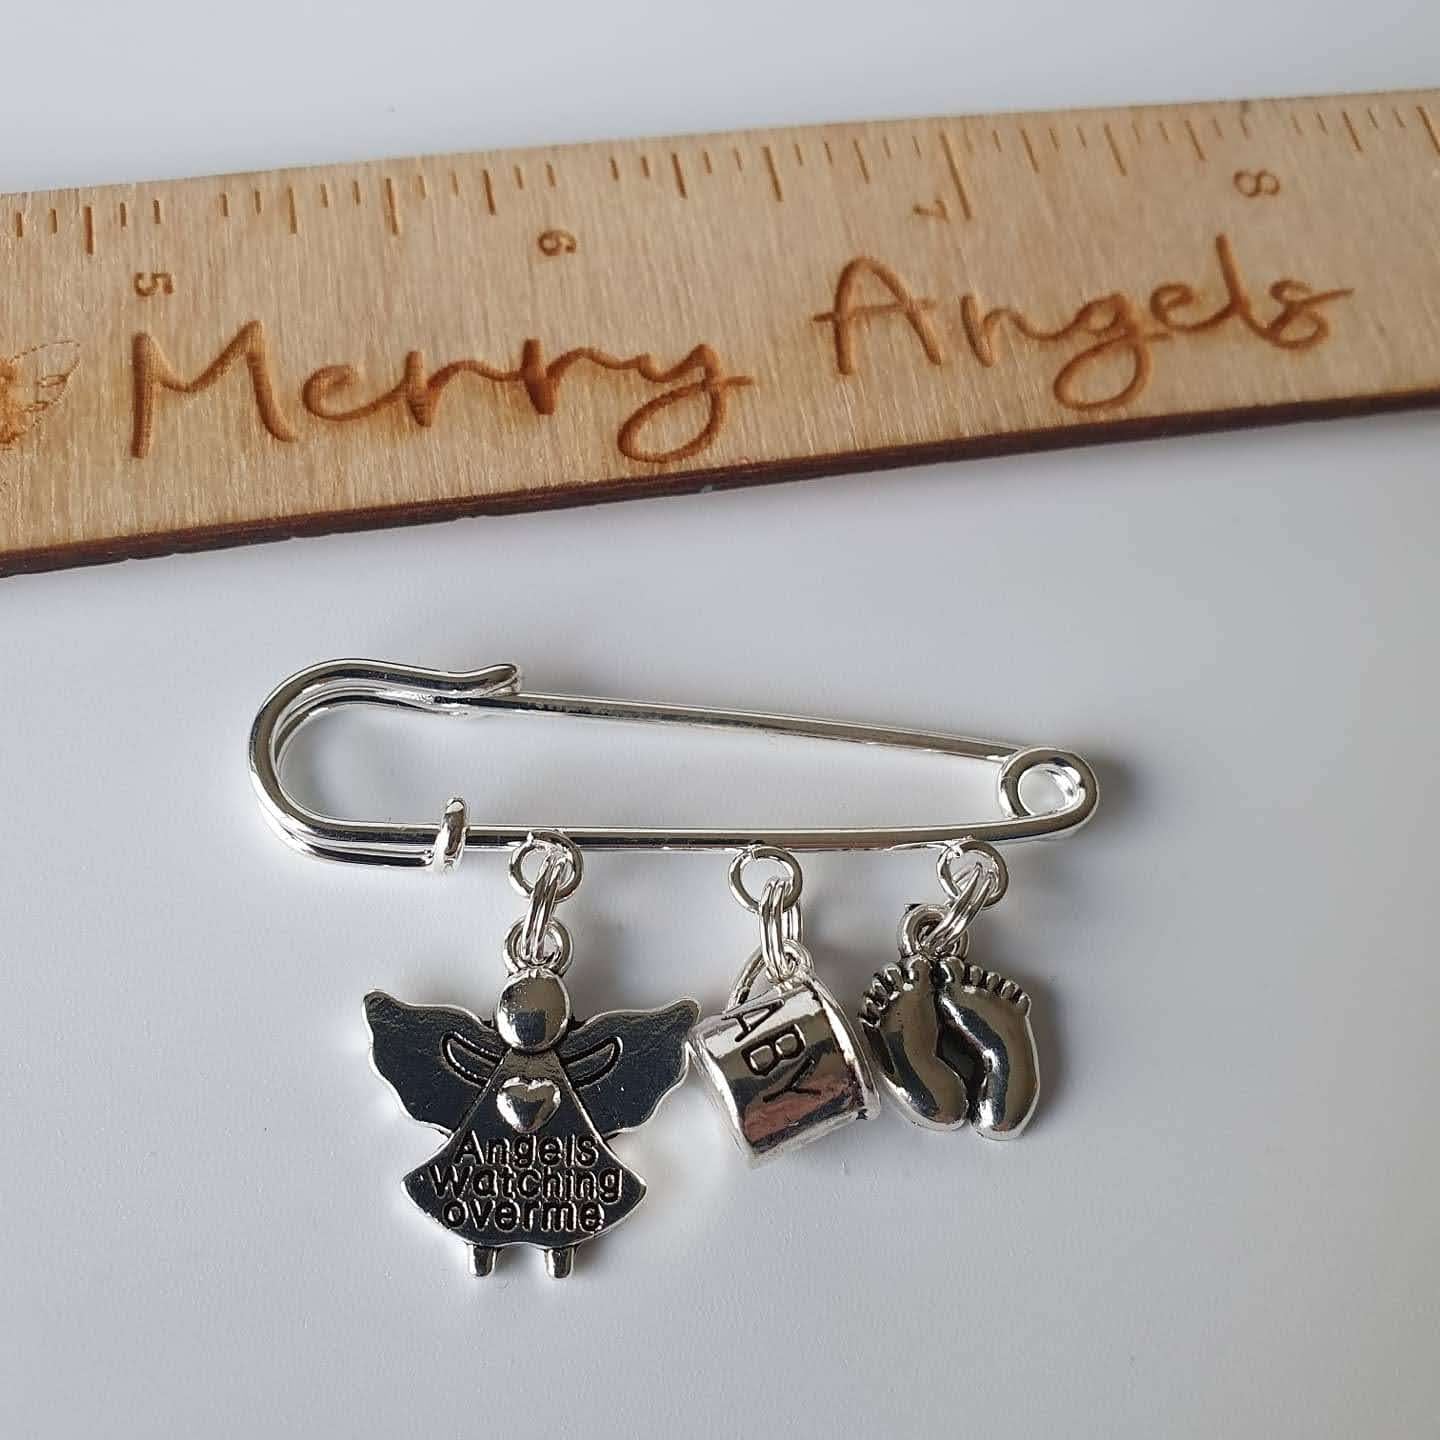 Picture is of a silver plated pram pin with baby feet, baby cup, and angel with the words Angels watching over me engraved on it